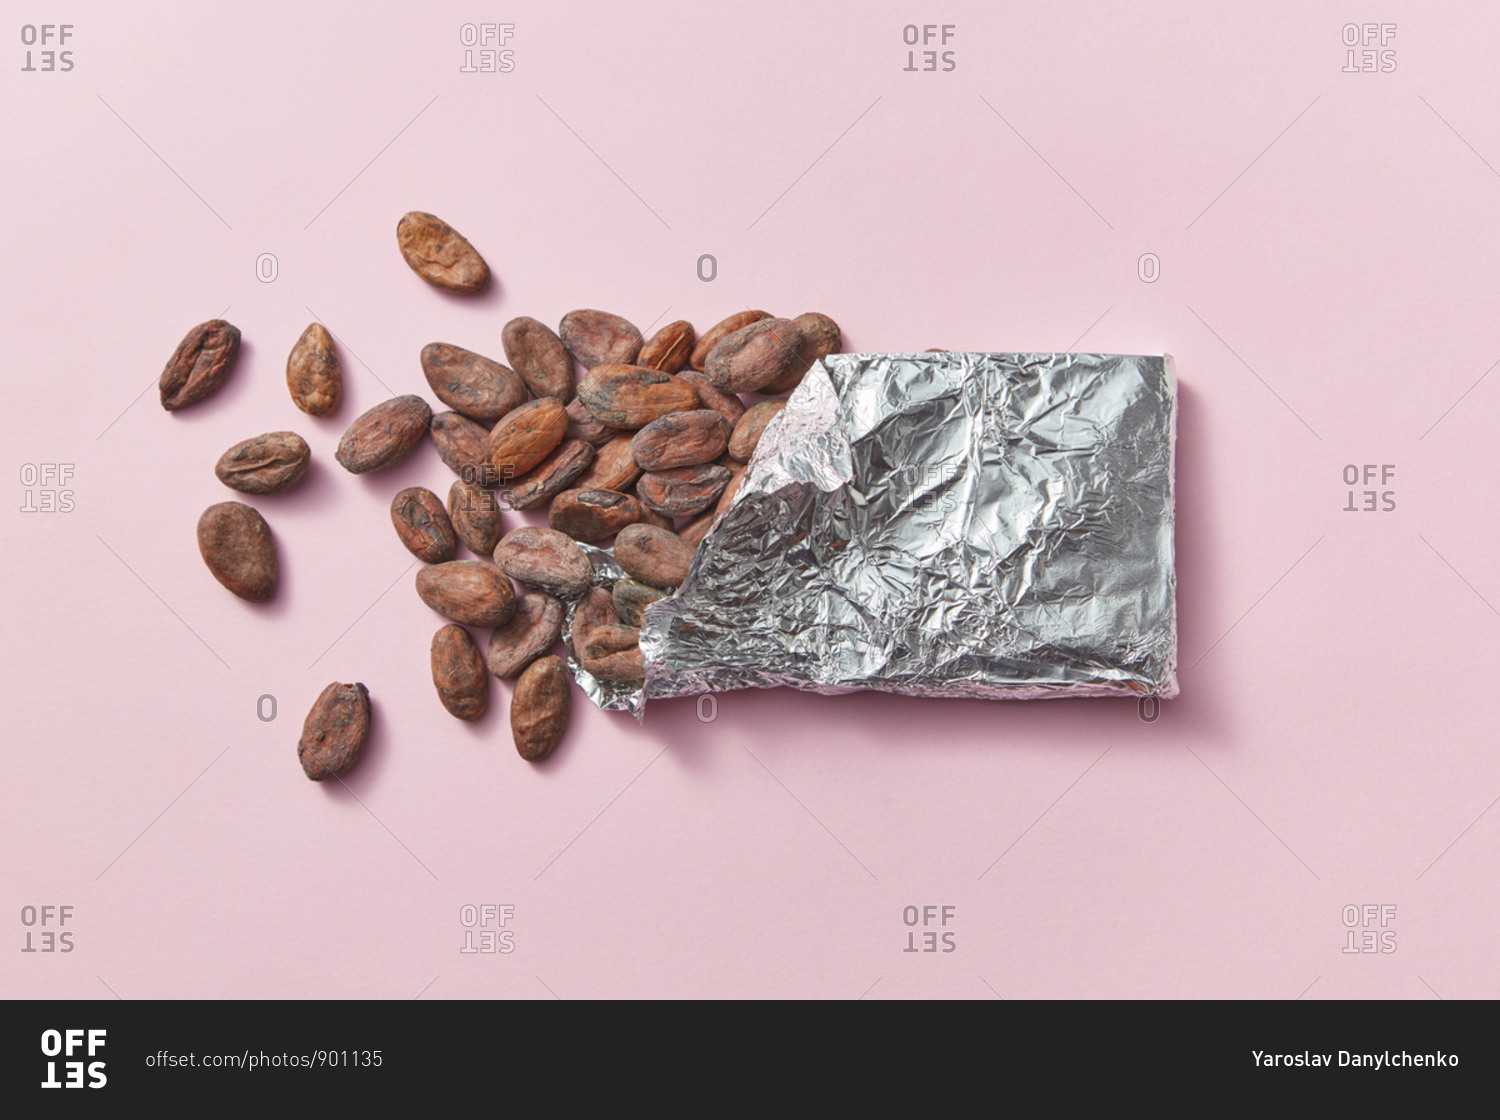 Chocolate bar made up of natural organic cocoa beans in tin foil on a light pink background with copy space.